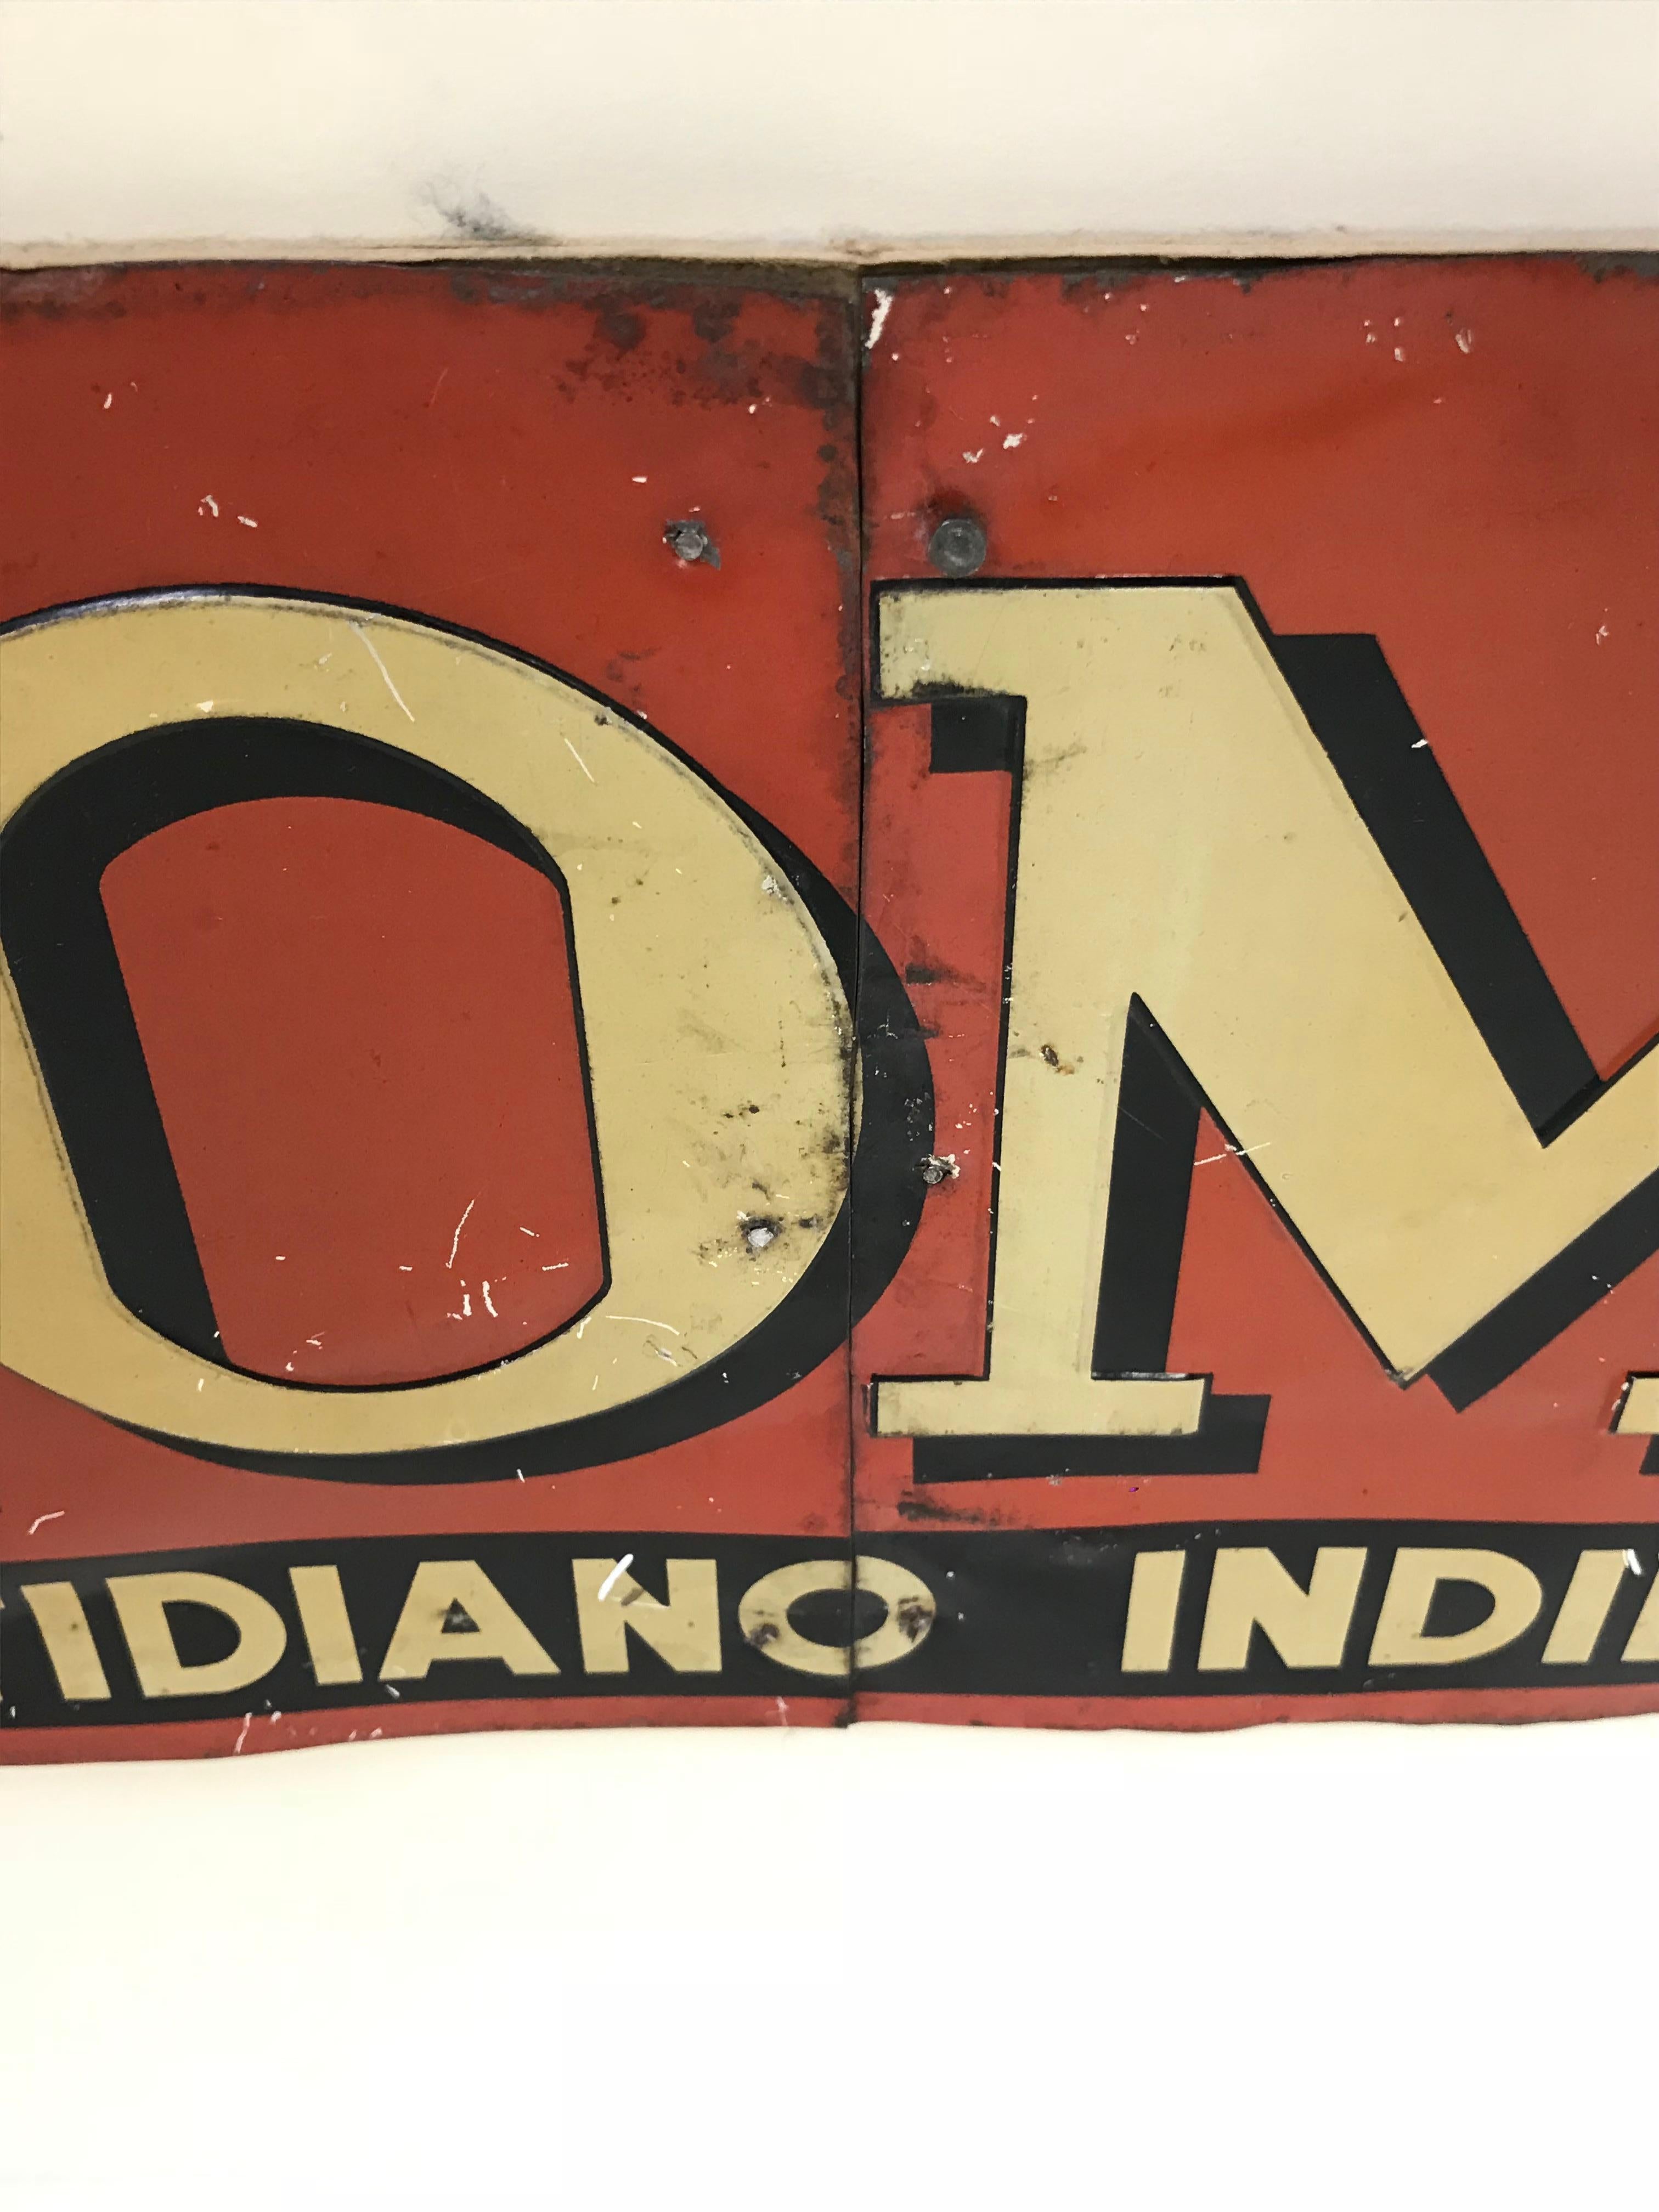 1950s Italian Vintage Transferpinted Red and Cream Roma Newspaper Sign 1